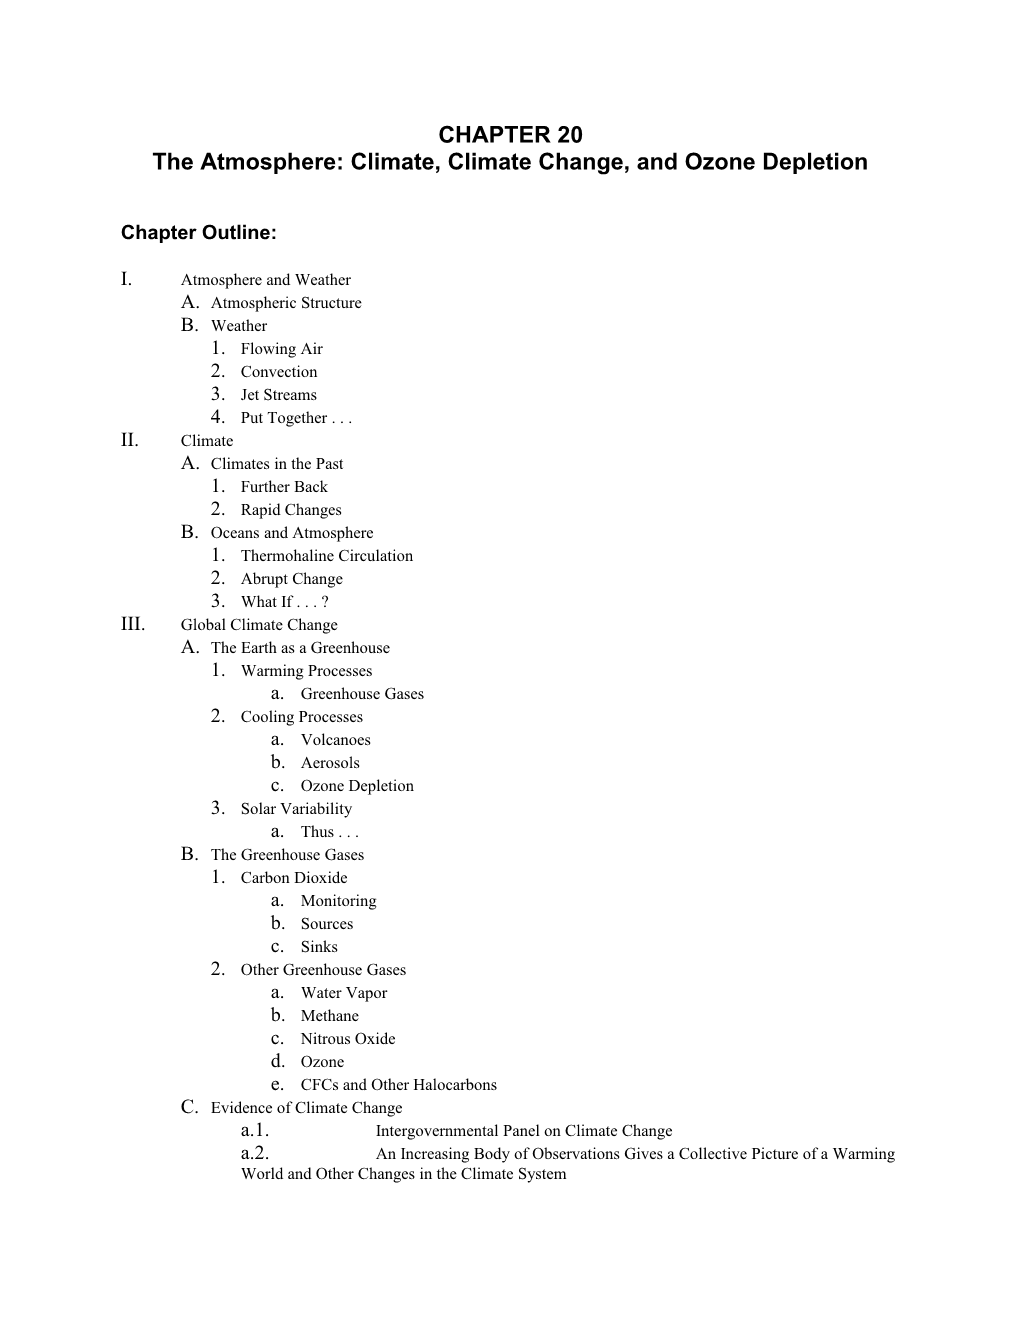 The Atmosphere: Climate, Climate Change, and Ozone Depletion